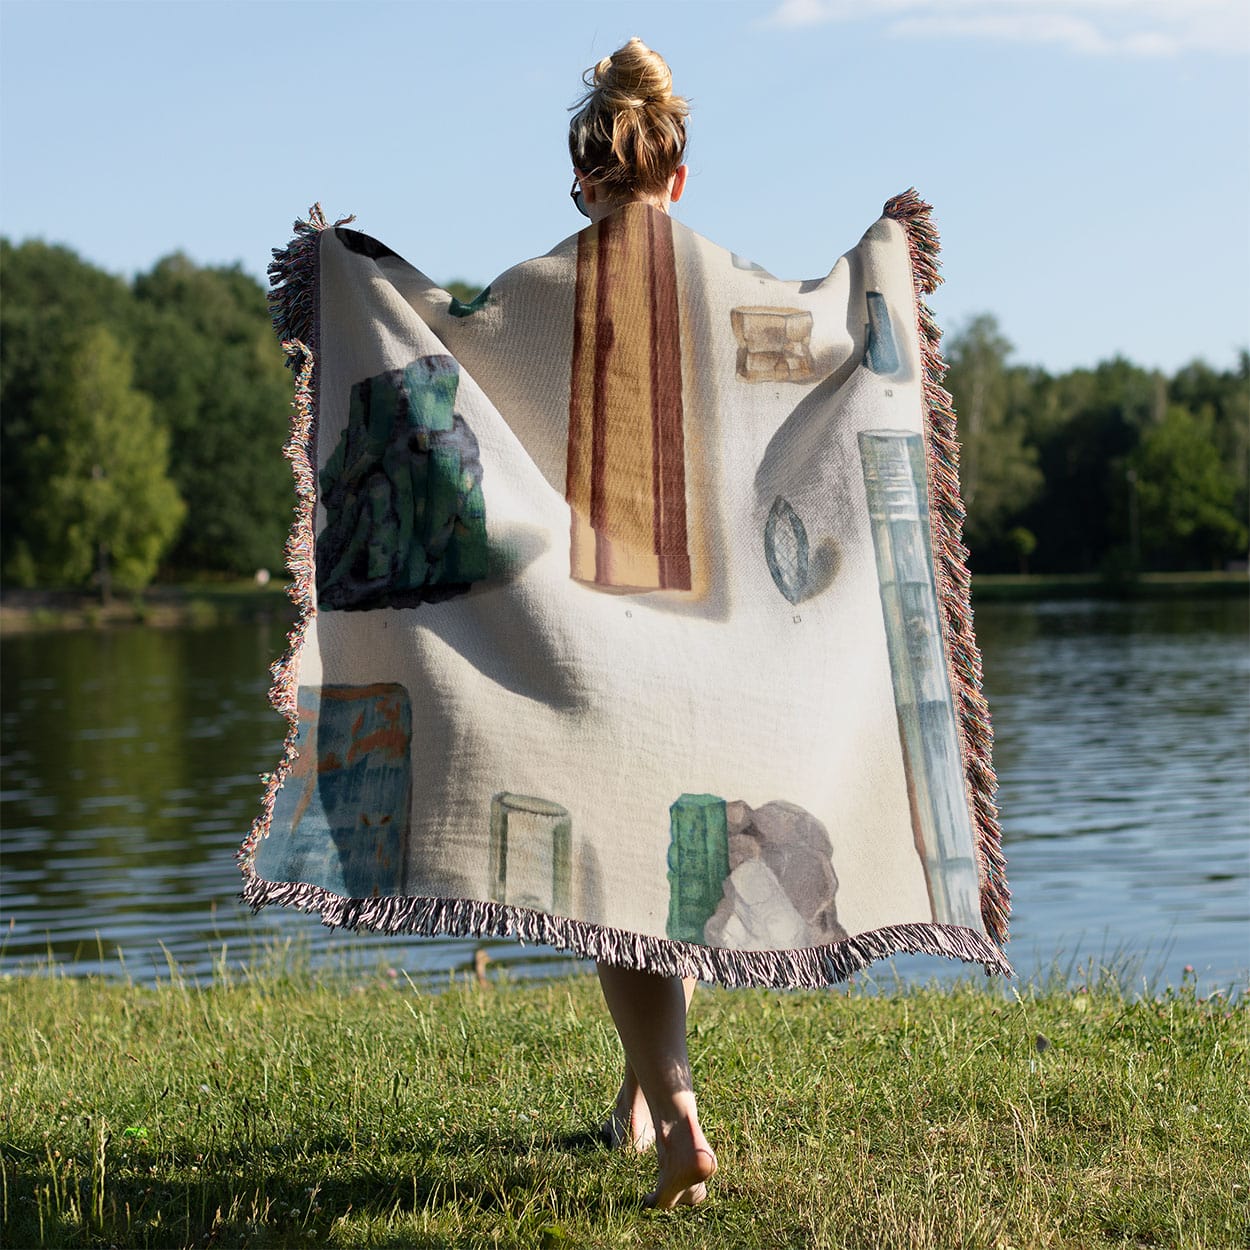 Light Green and Blue Crystal Gemstones Woven Blanket Held on a Woman's Back Outside